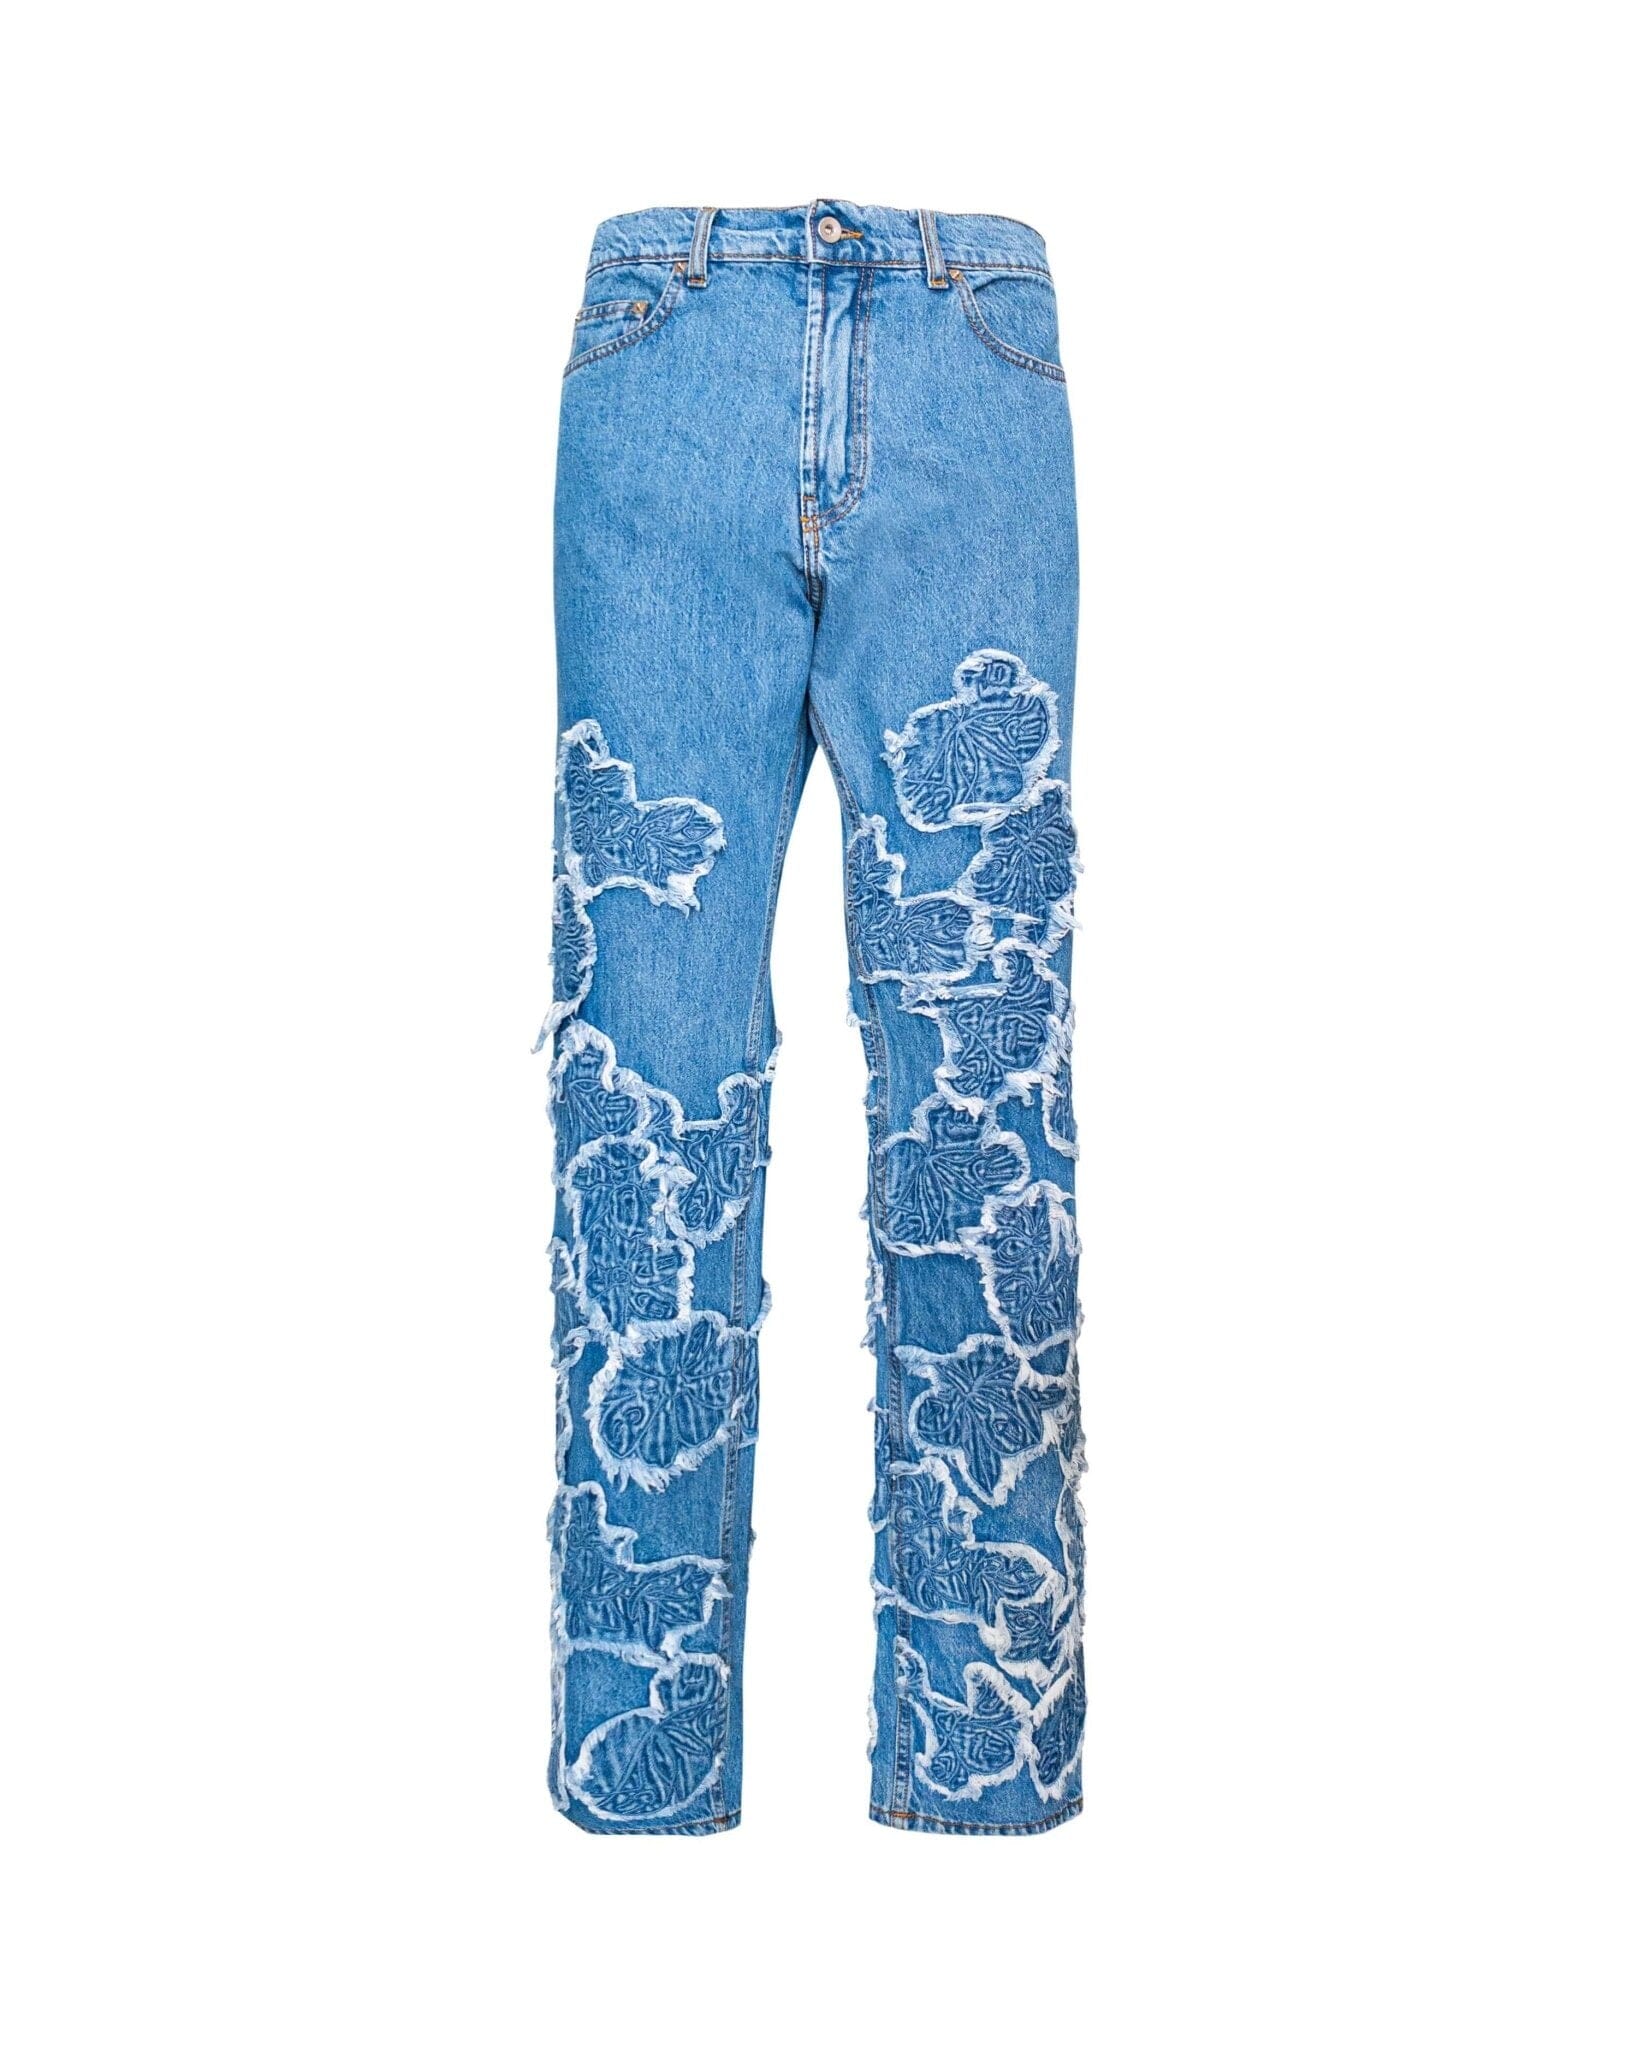 Jeans Straight Baggy blue flowers embroidery